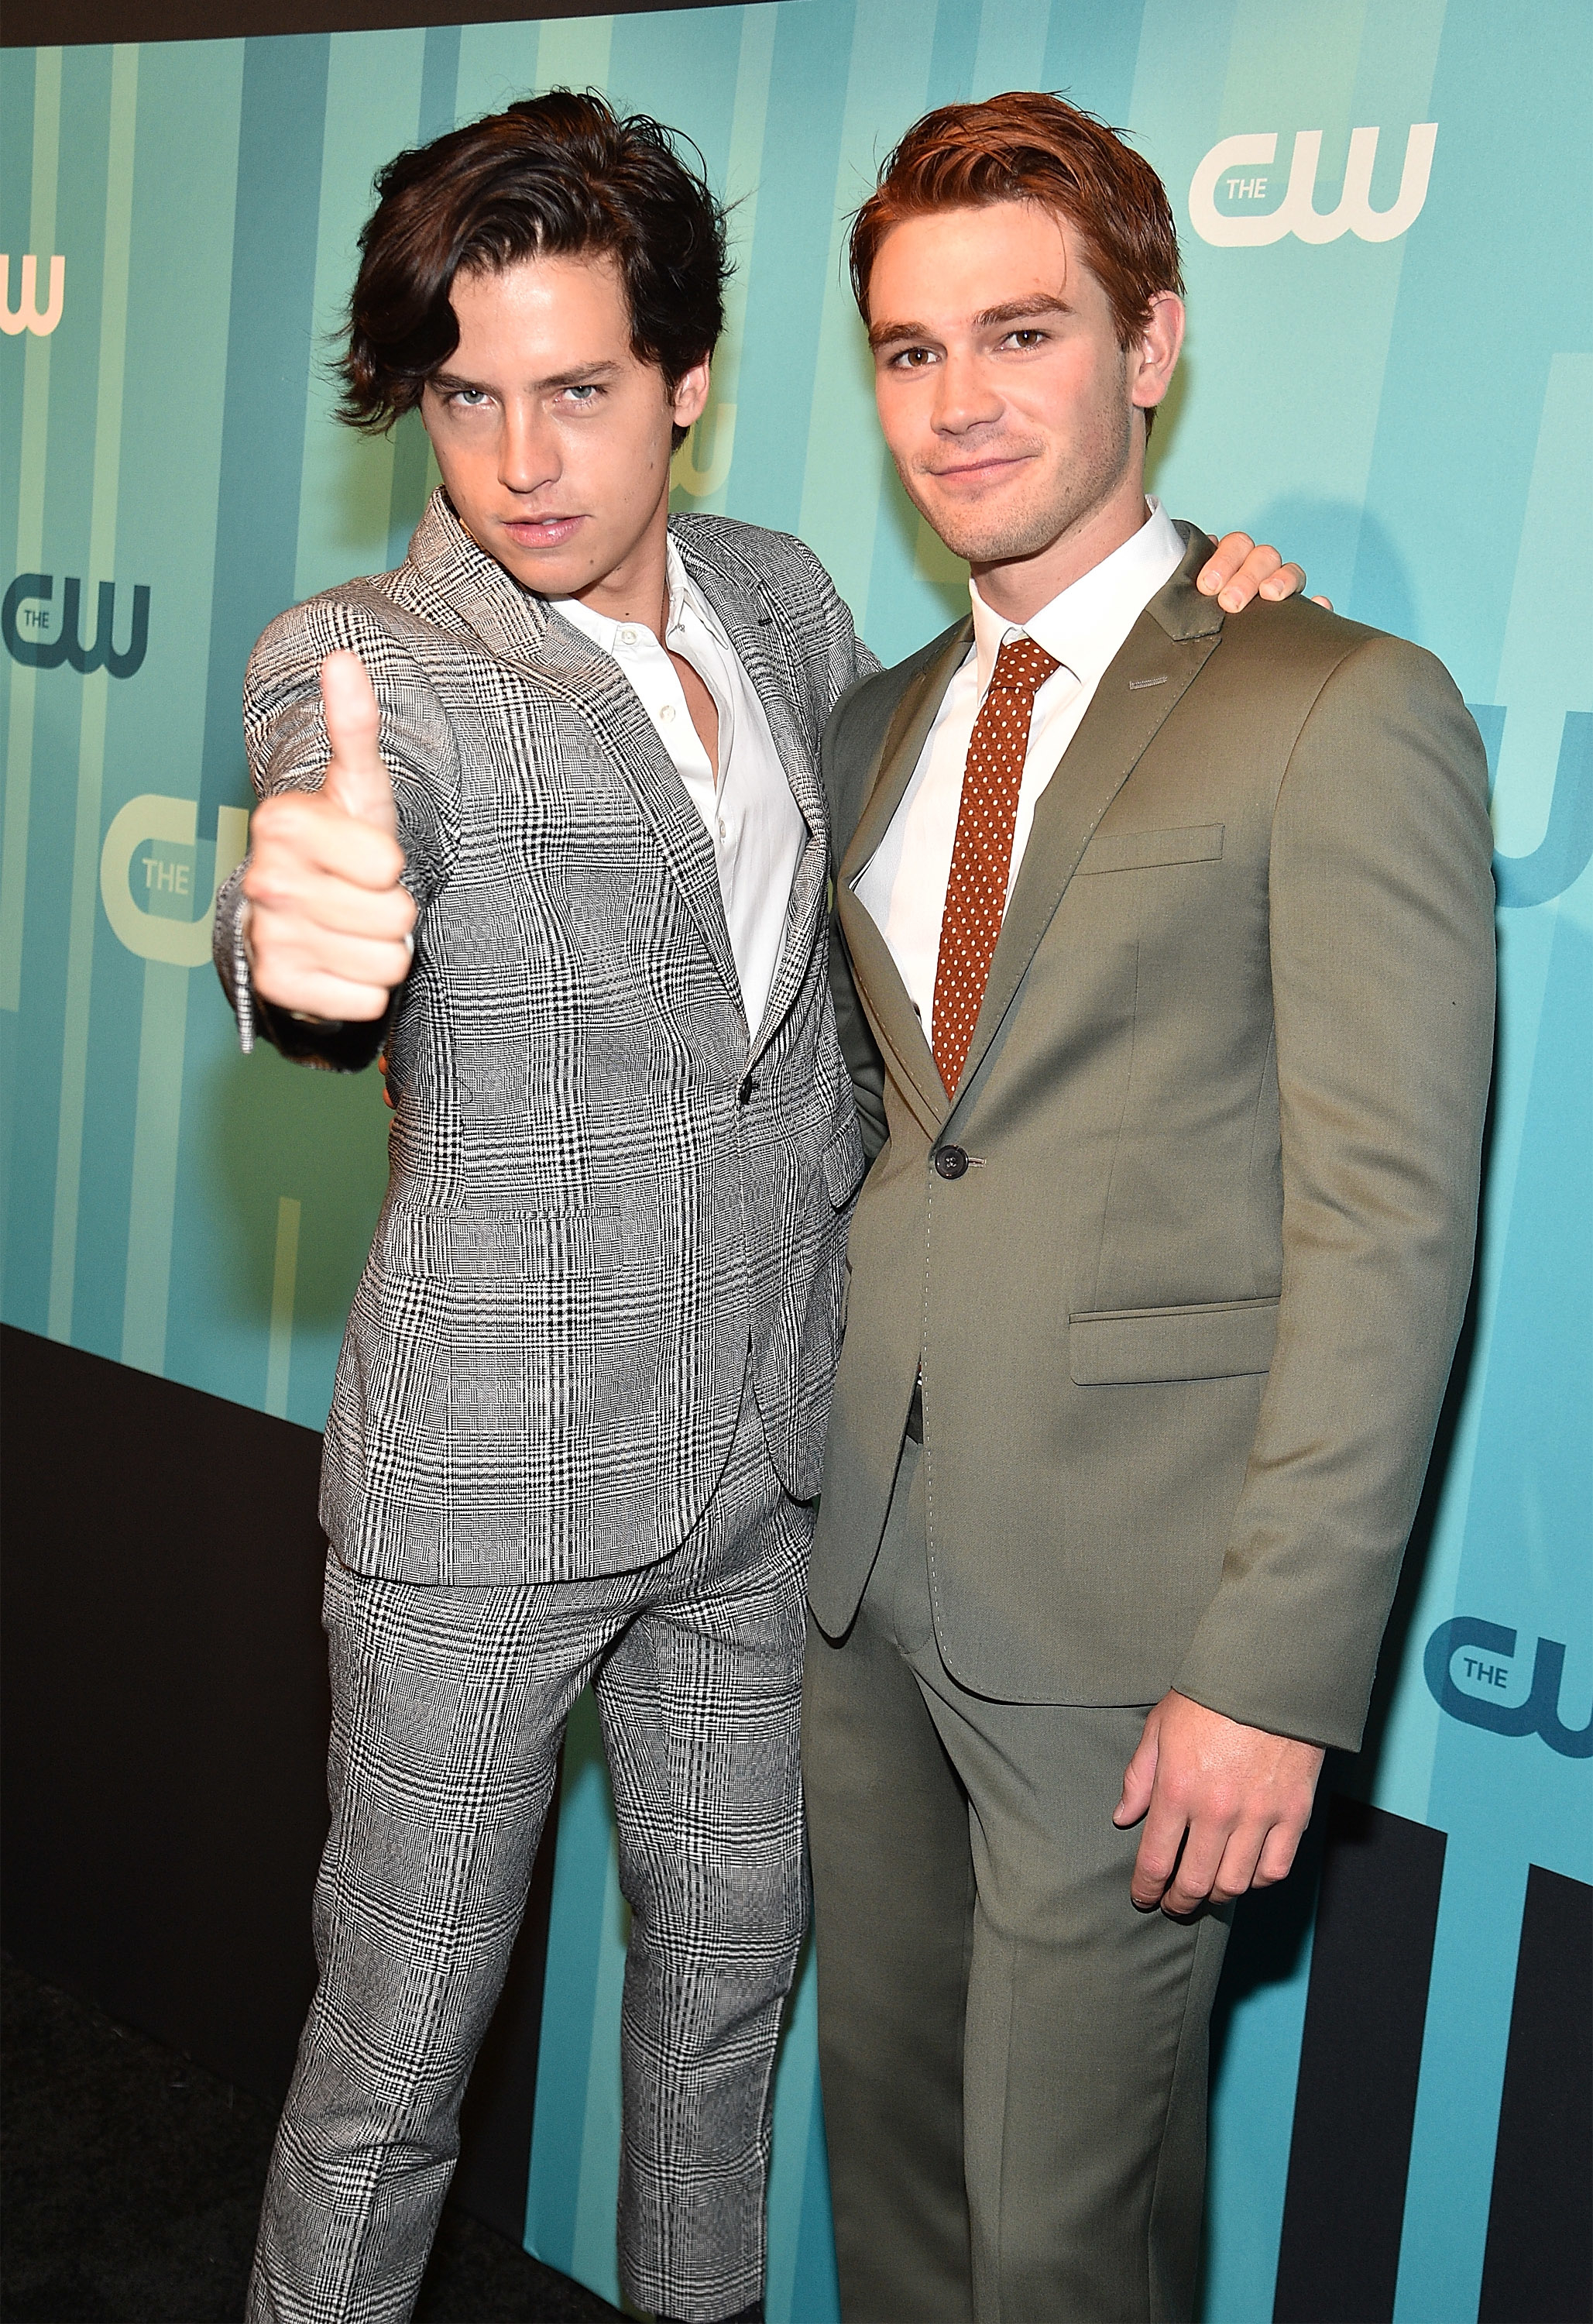 Cole and KJ in suits and standing together